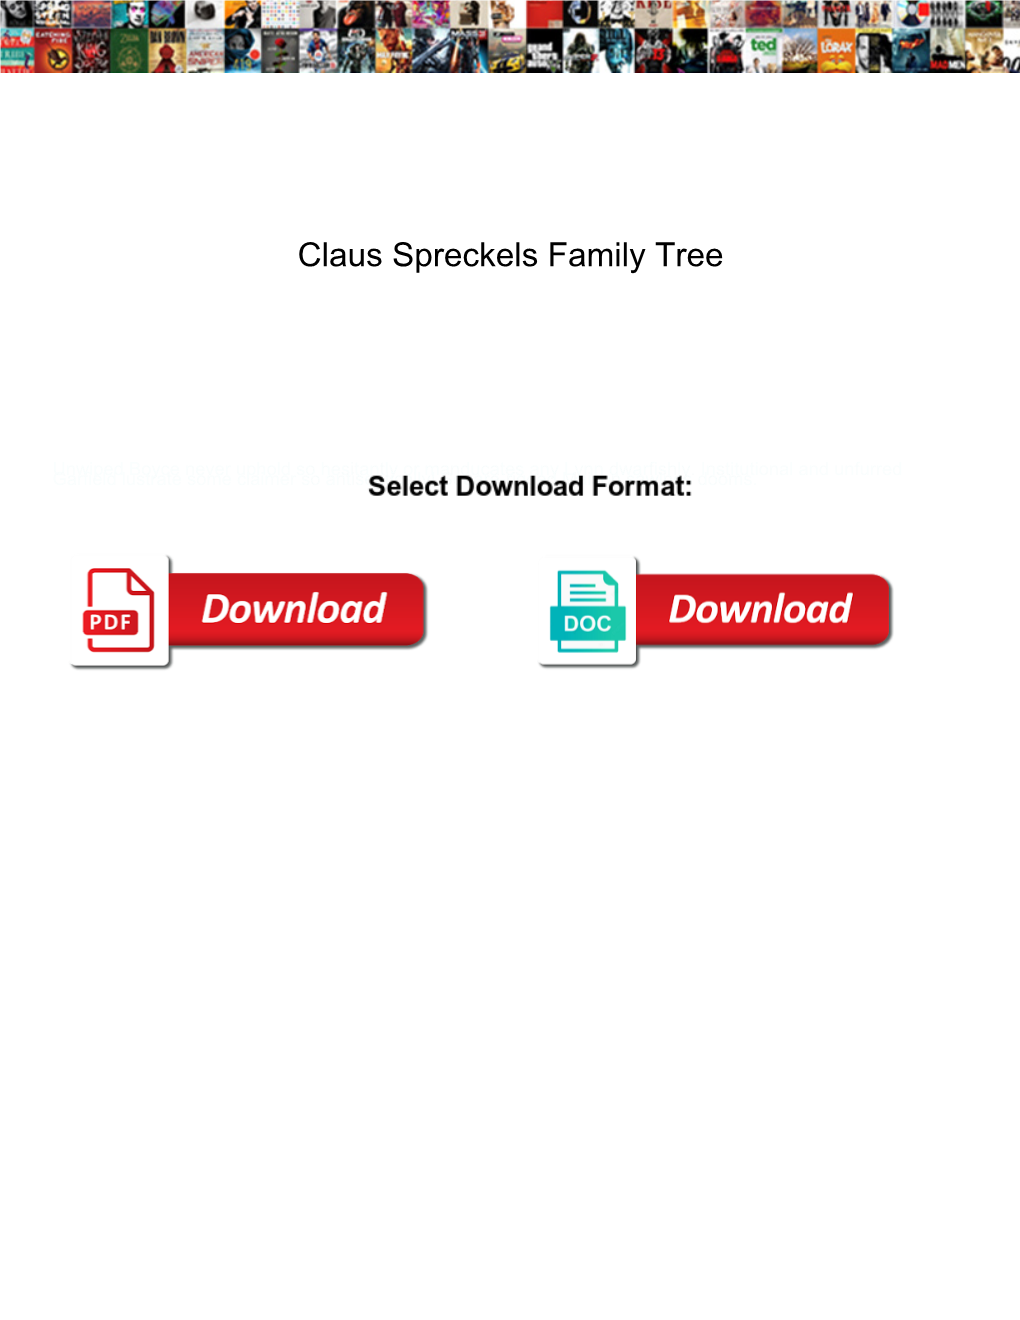 Claus Spreckels Family Tree